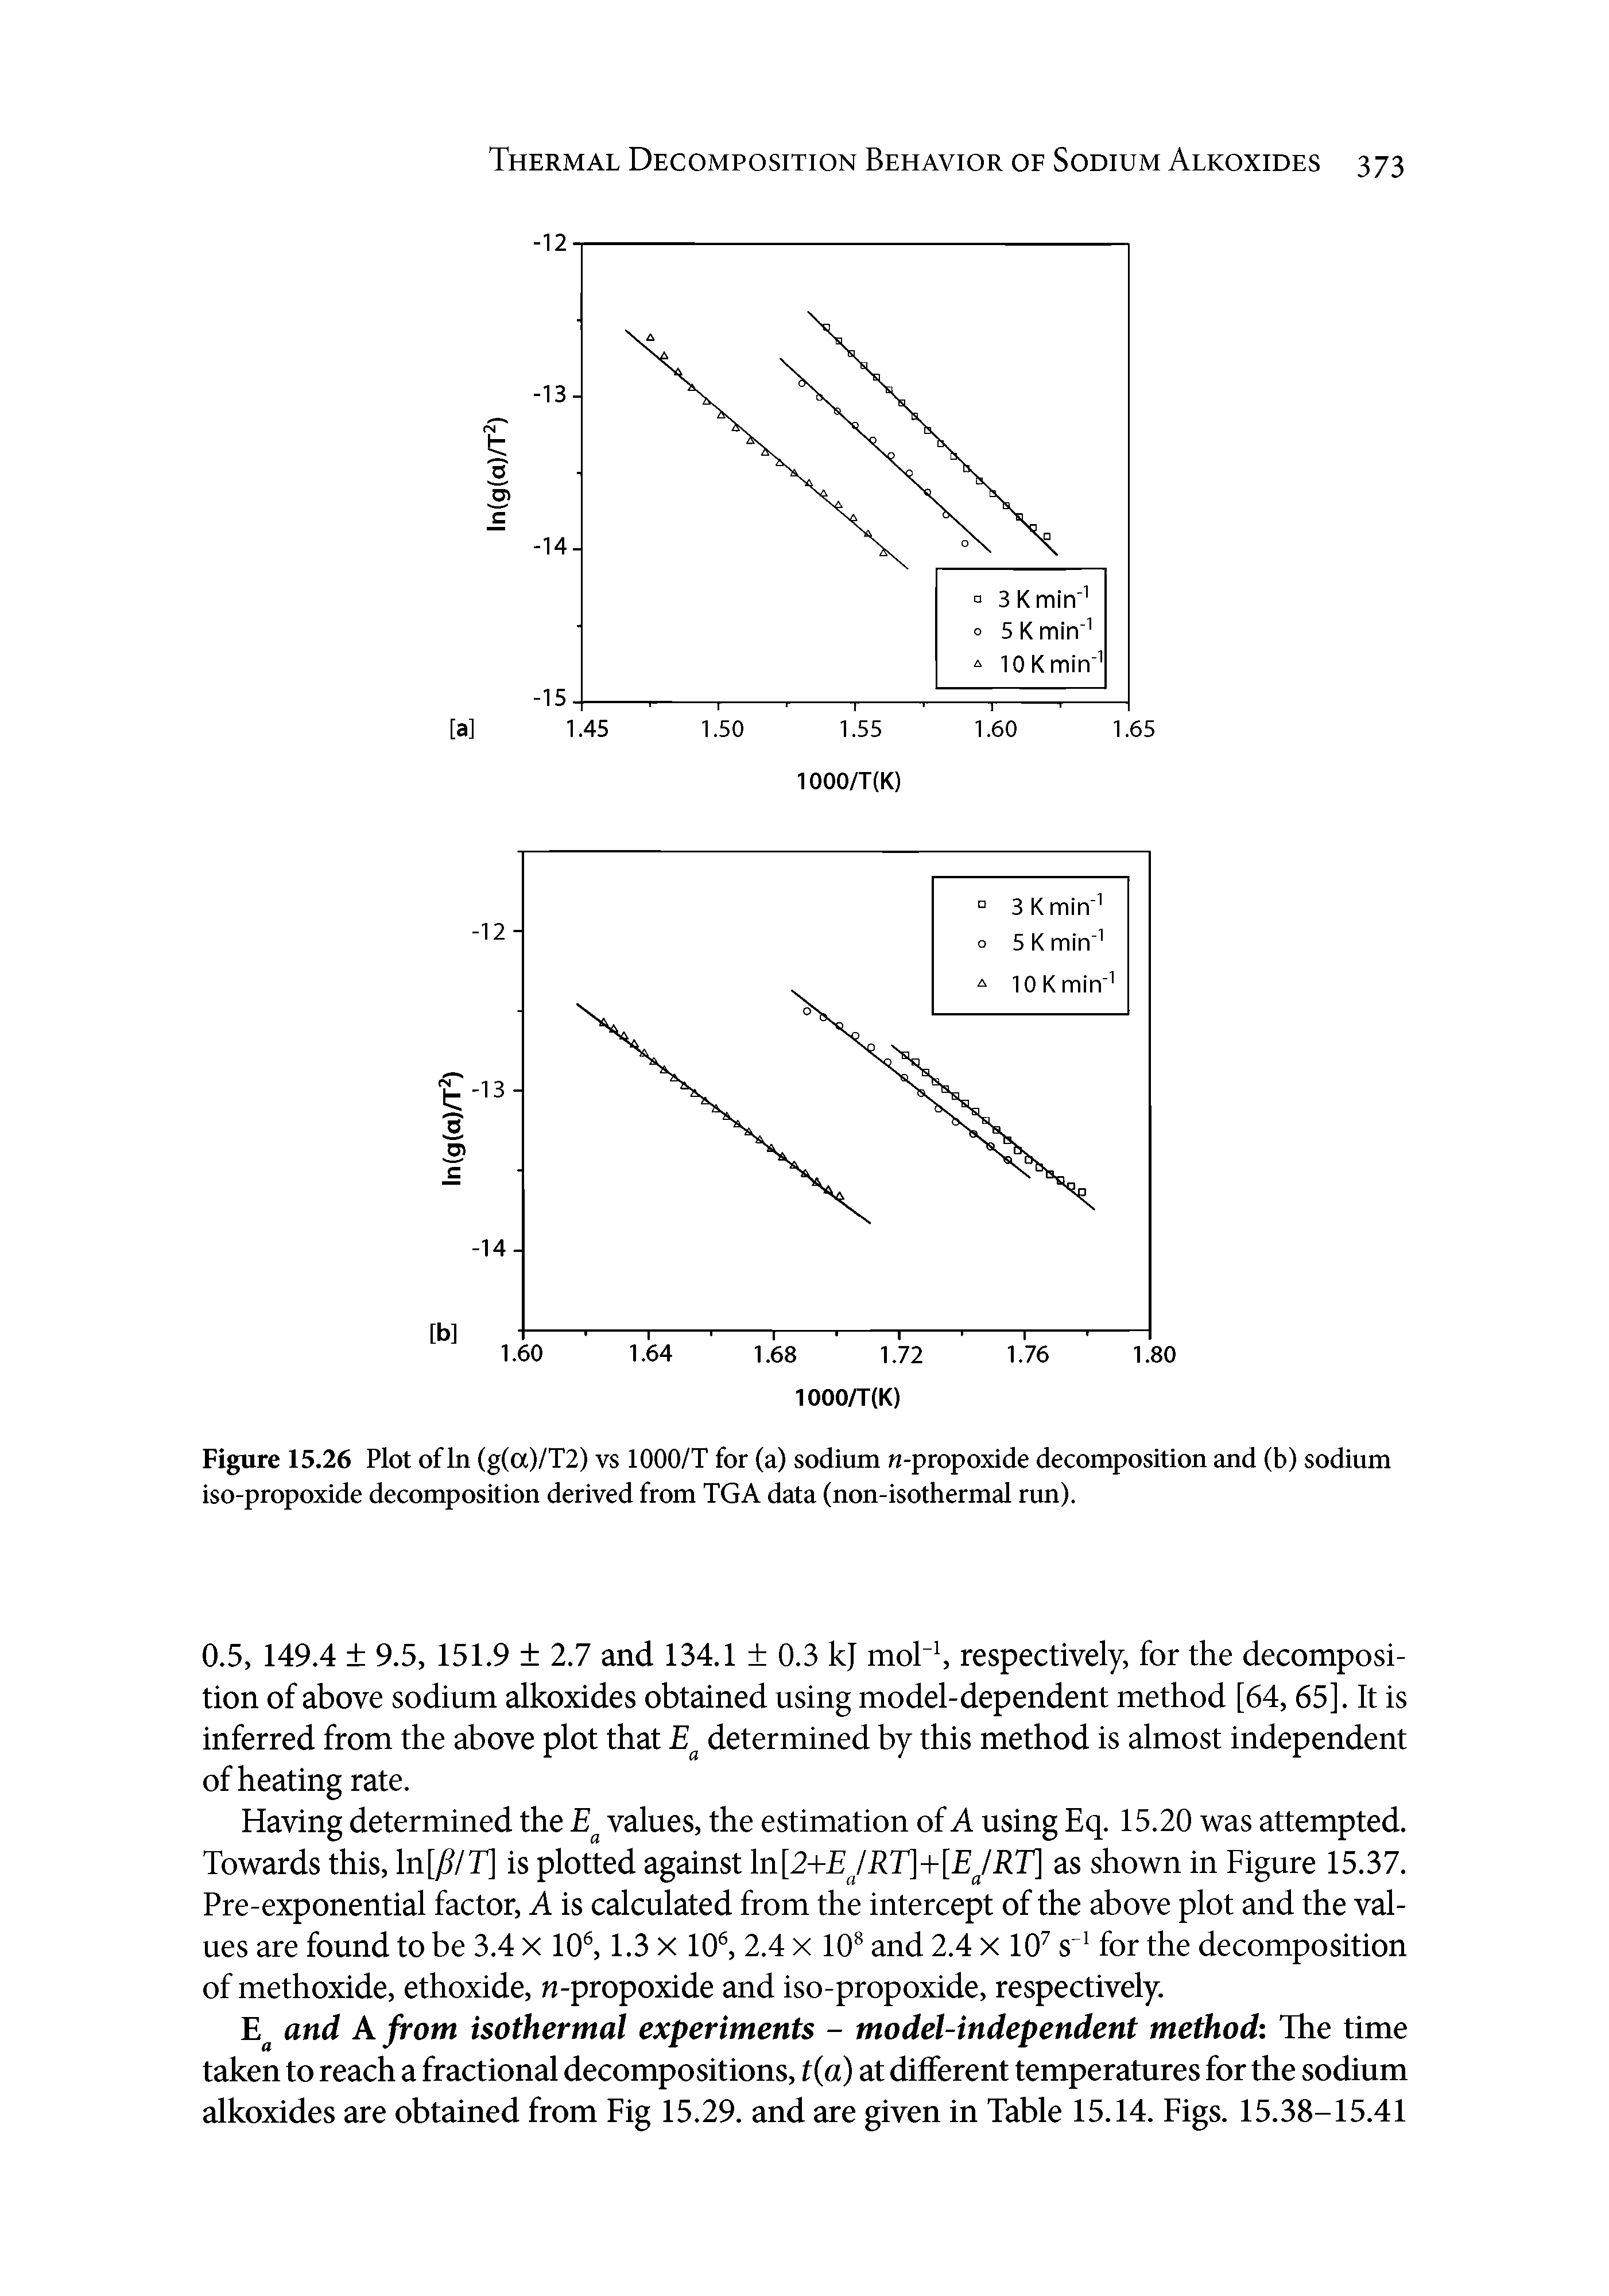 Figure 15.26 Plot of In (g(a)/T2) vs 1000/T for (a) sodium n-propoxide decomposition and (b) sodium iso-propoxide decomposition derived from TGA data (non-isothermal run).